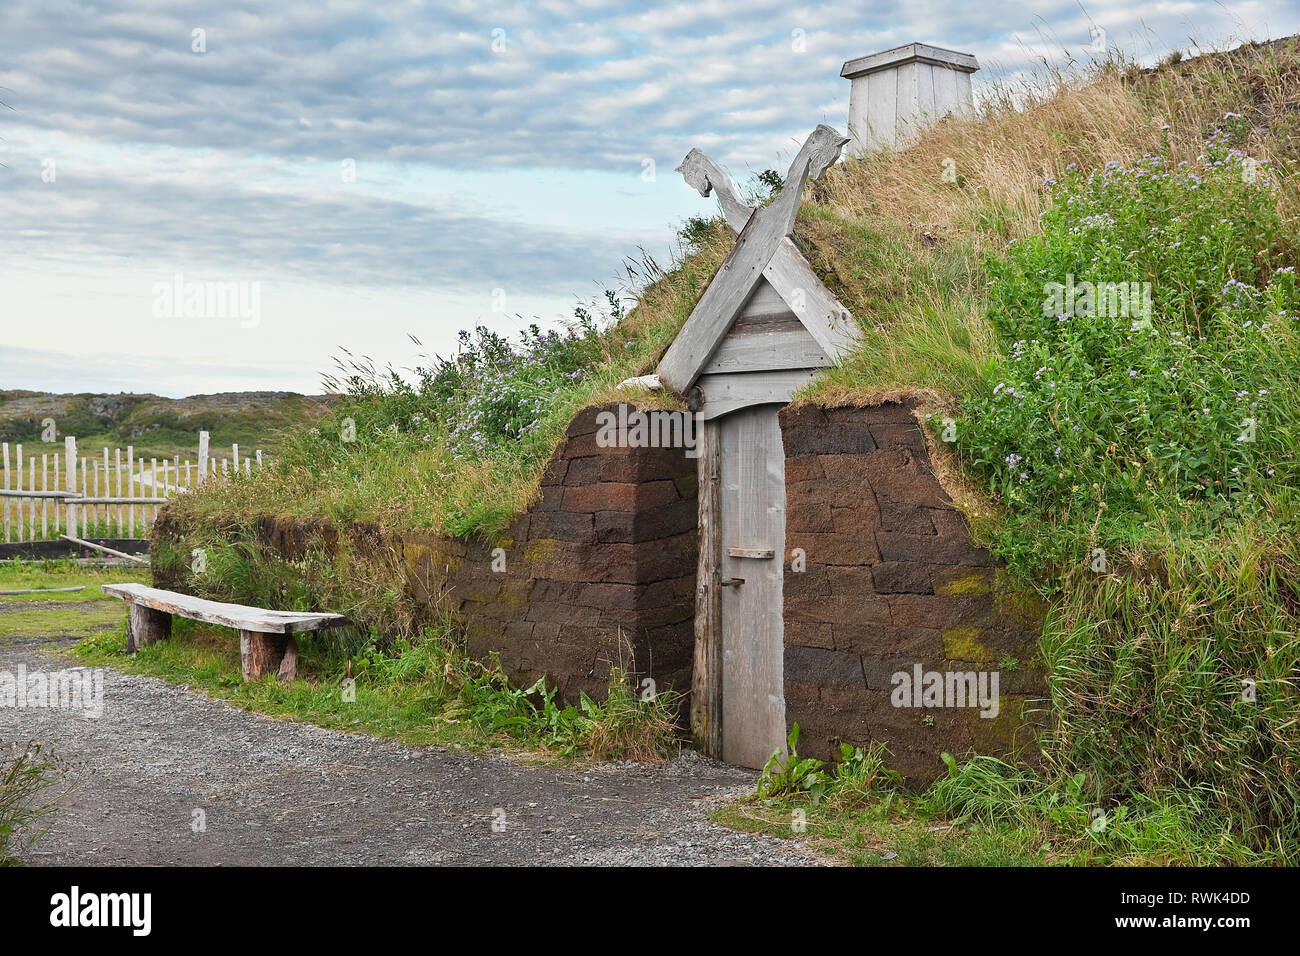 Entrance to a recreated Viking longhouse with its characteristic sod roof and peat block walls. L'Anse aux Meadows National Historic Site, L'Anse aux Meadows, Newfoundland, Canada Stock Photo